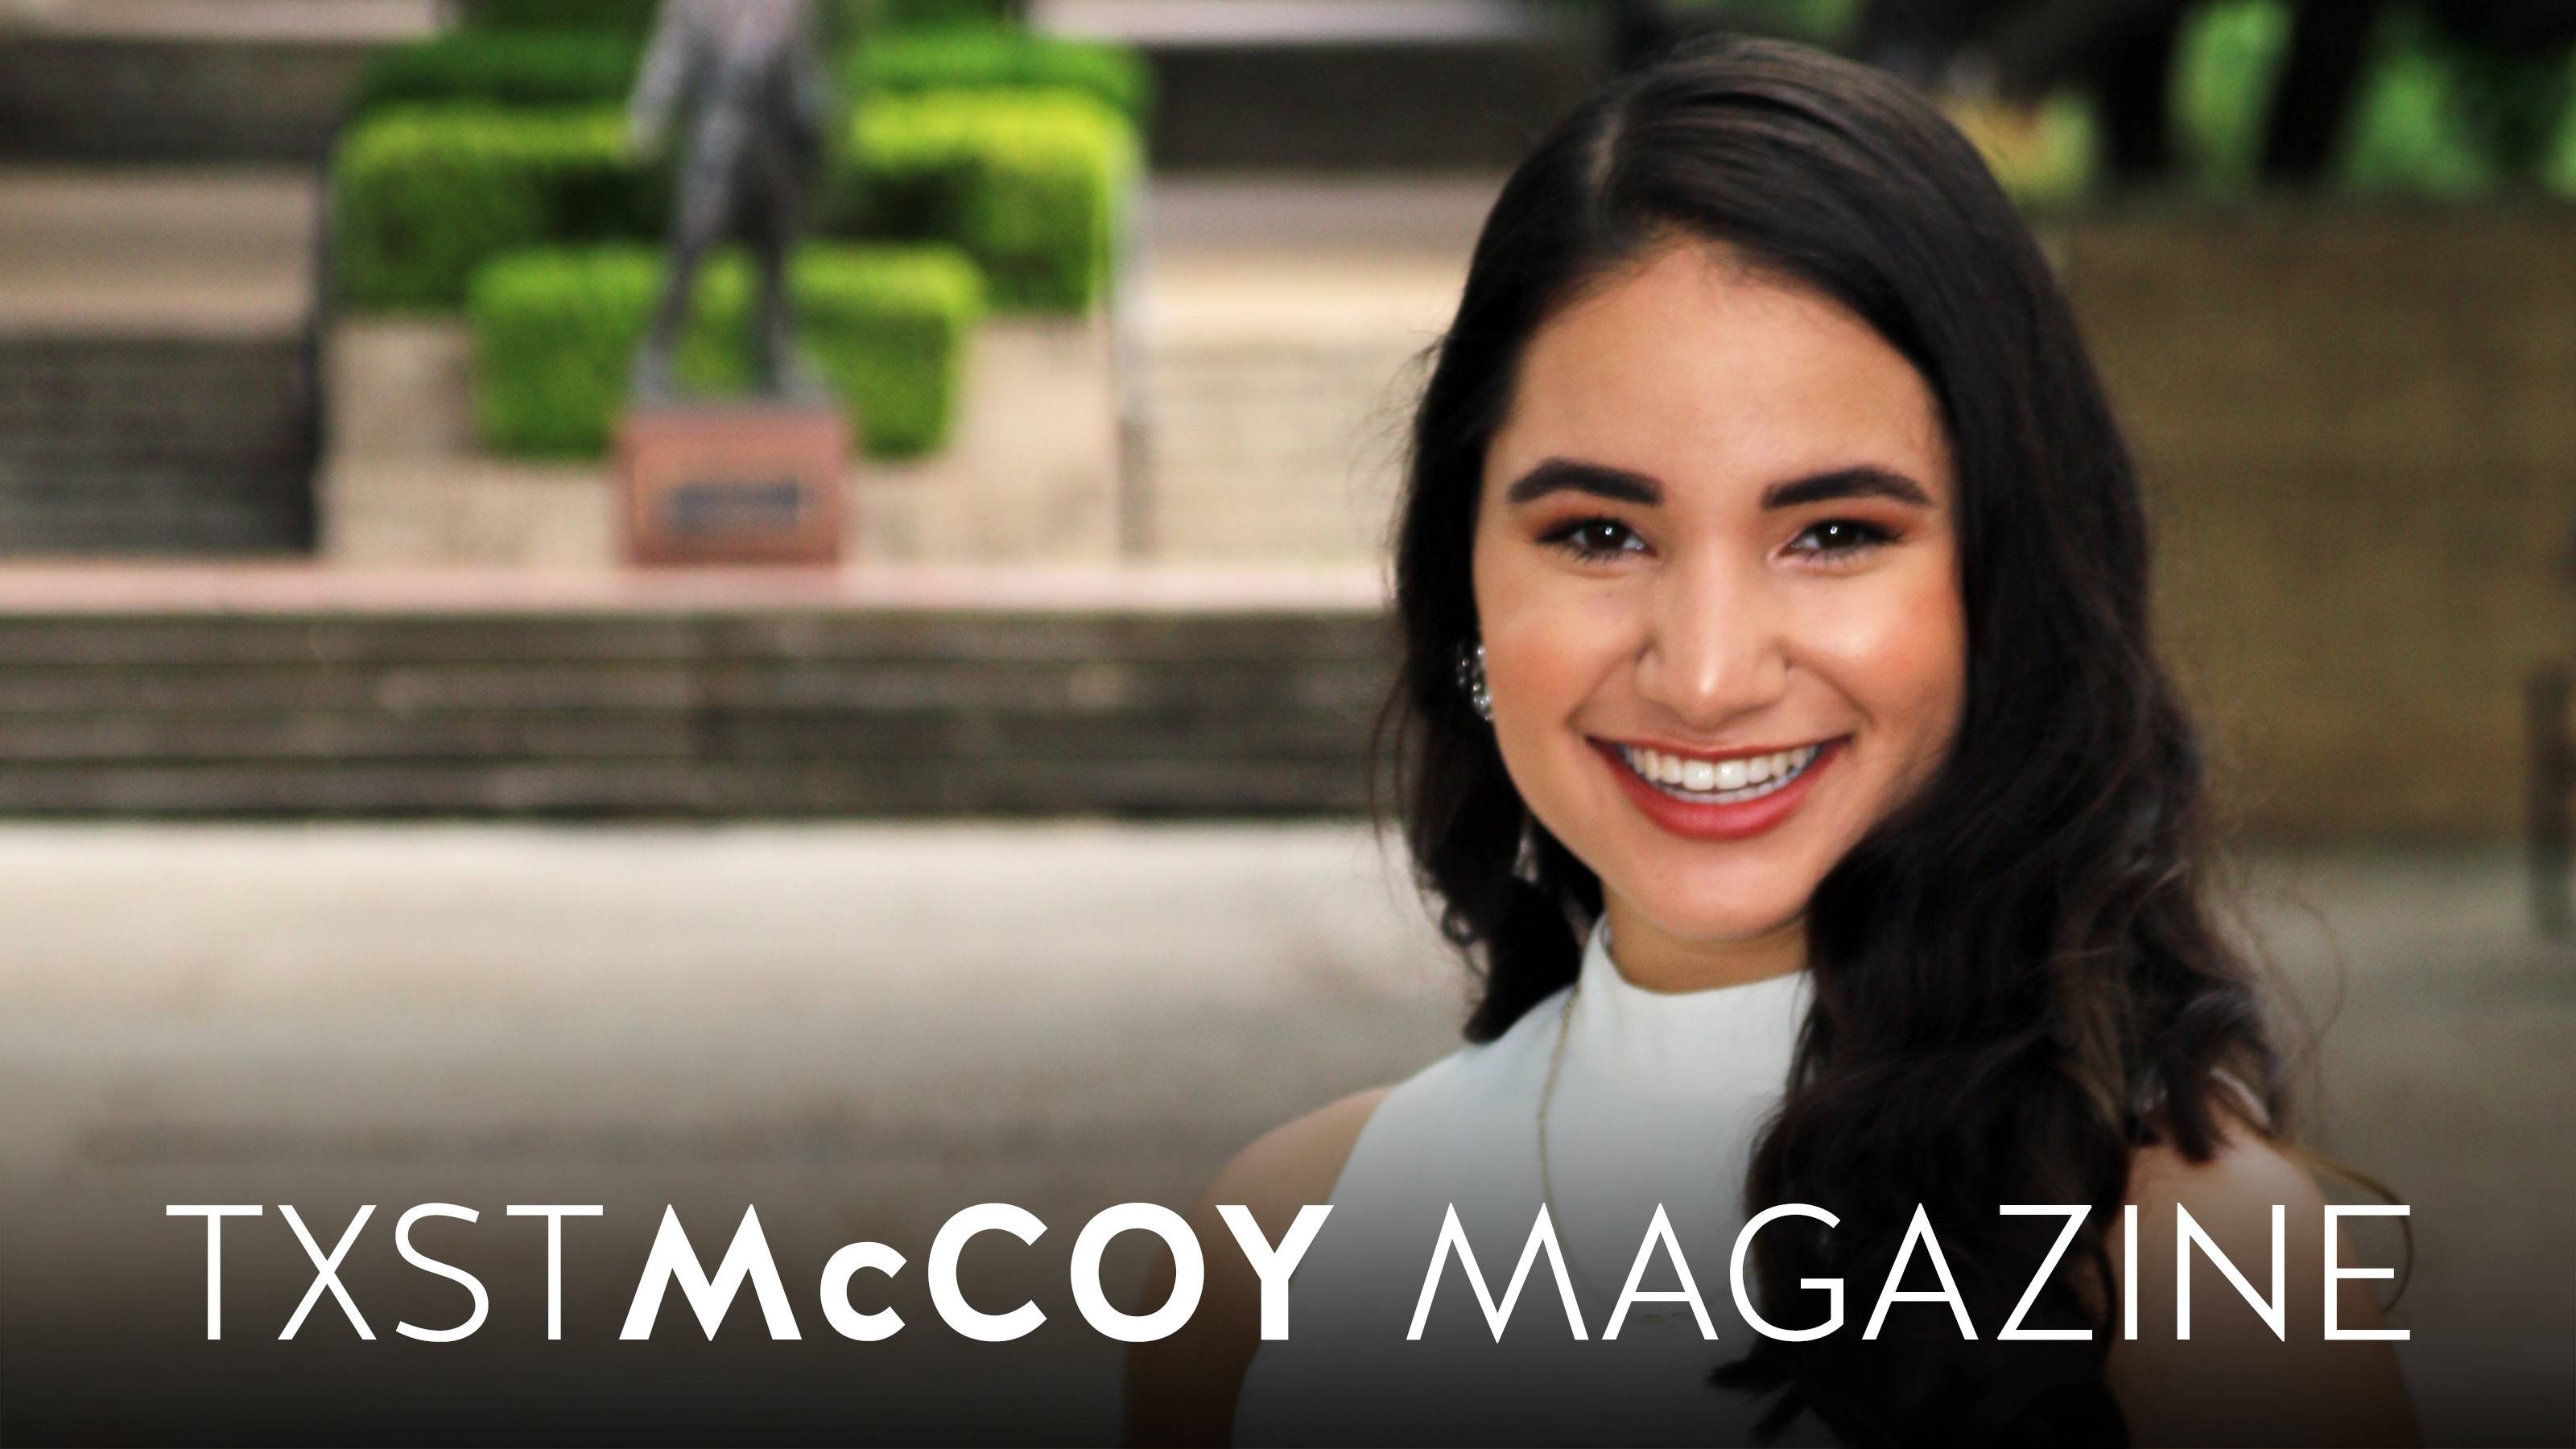 Leanna Mouton with text overlay that reads, "TXST McCoy Magazine"